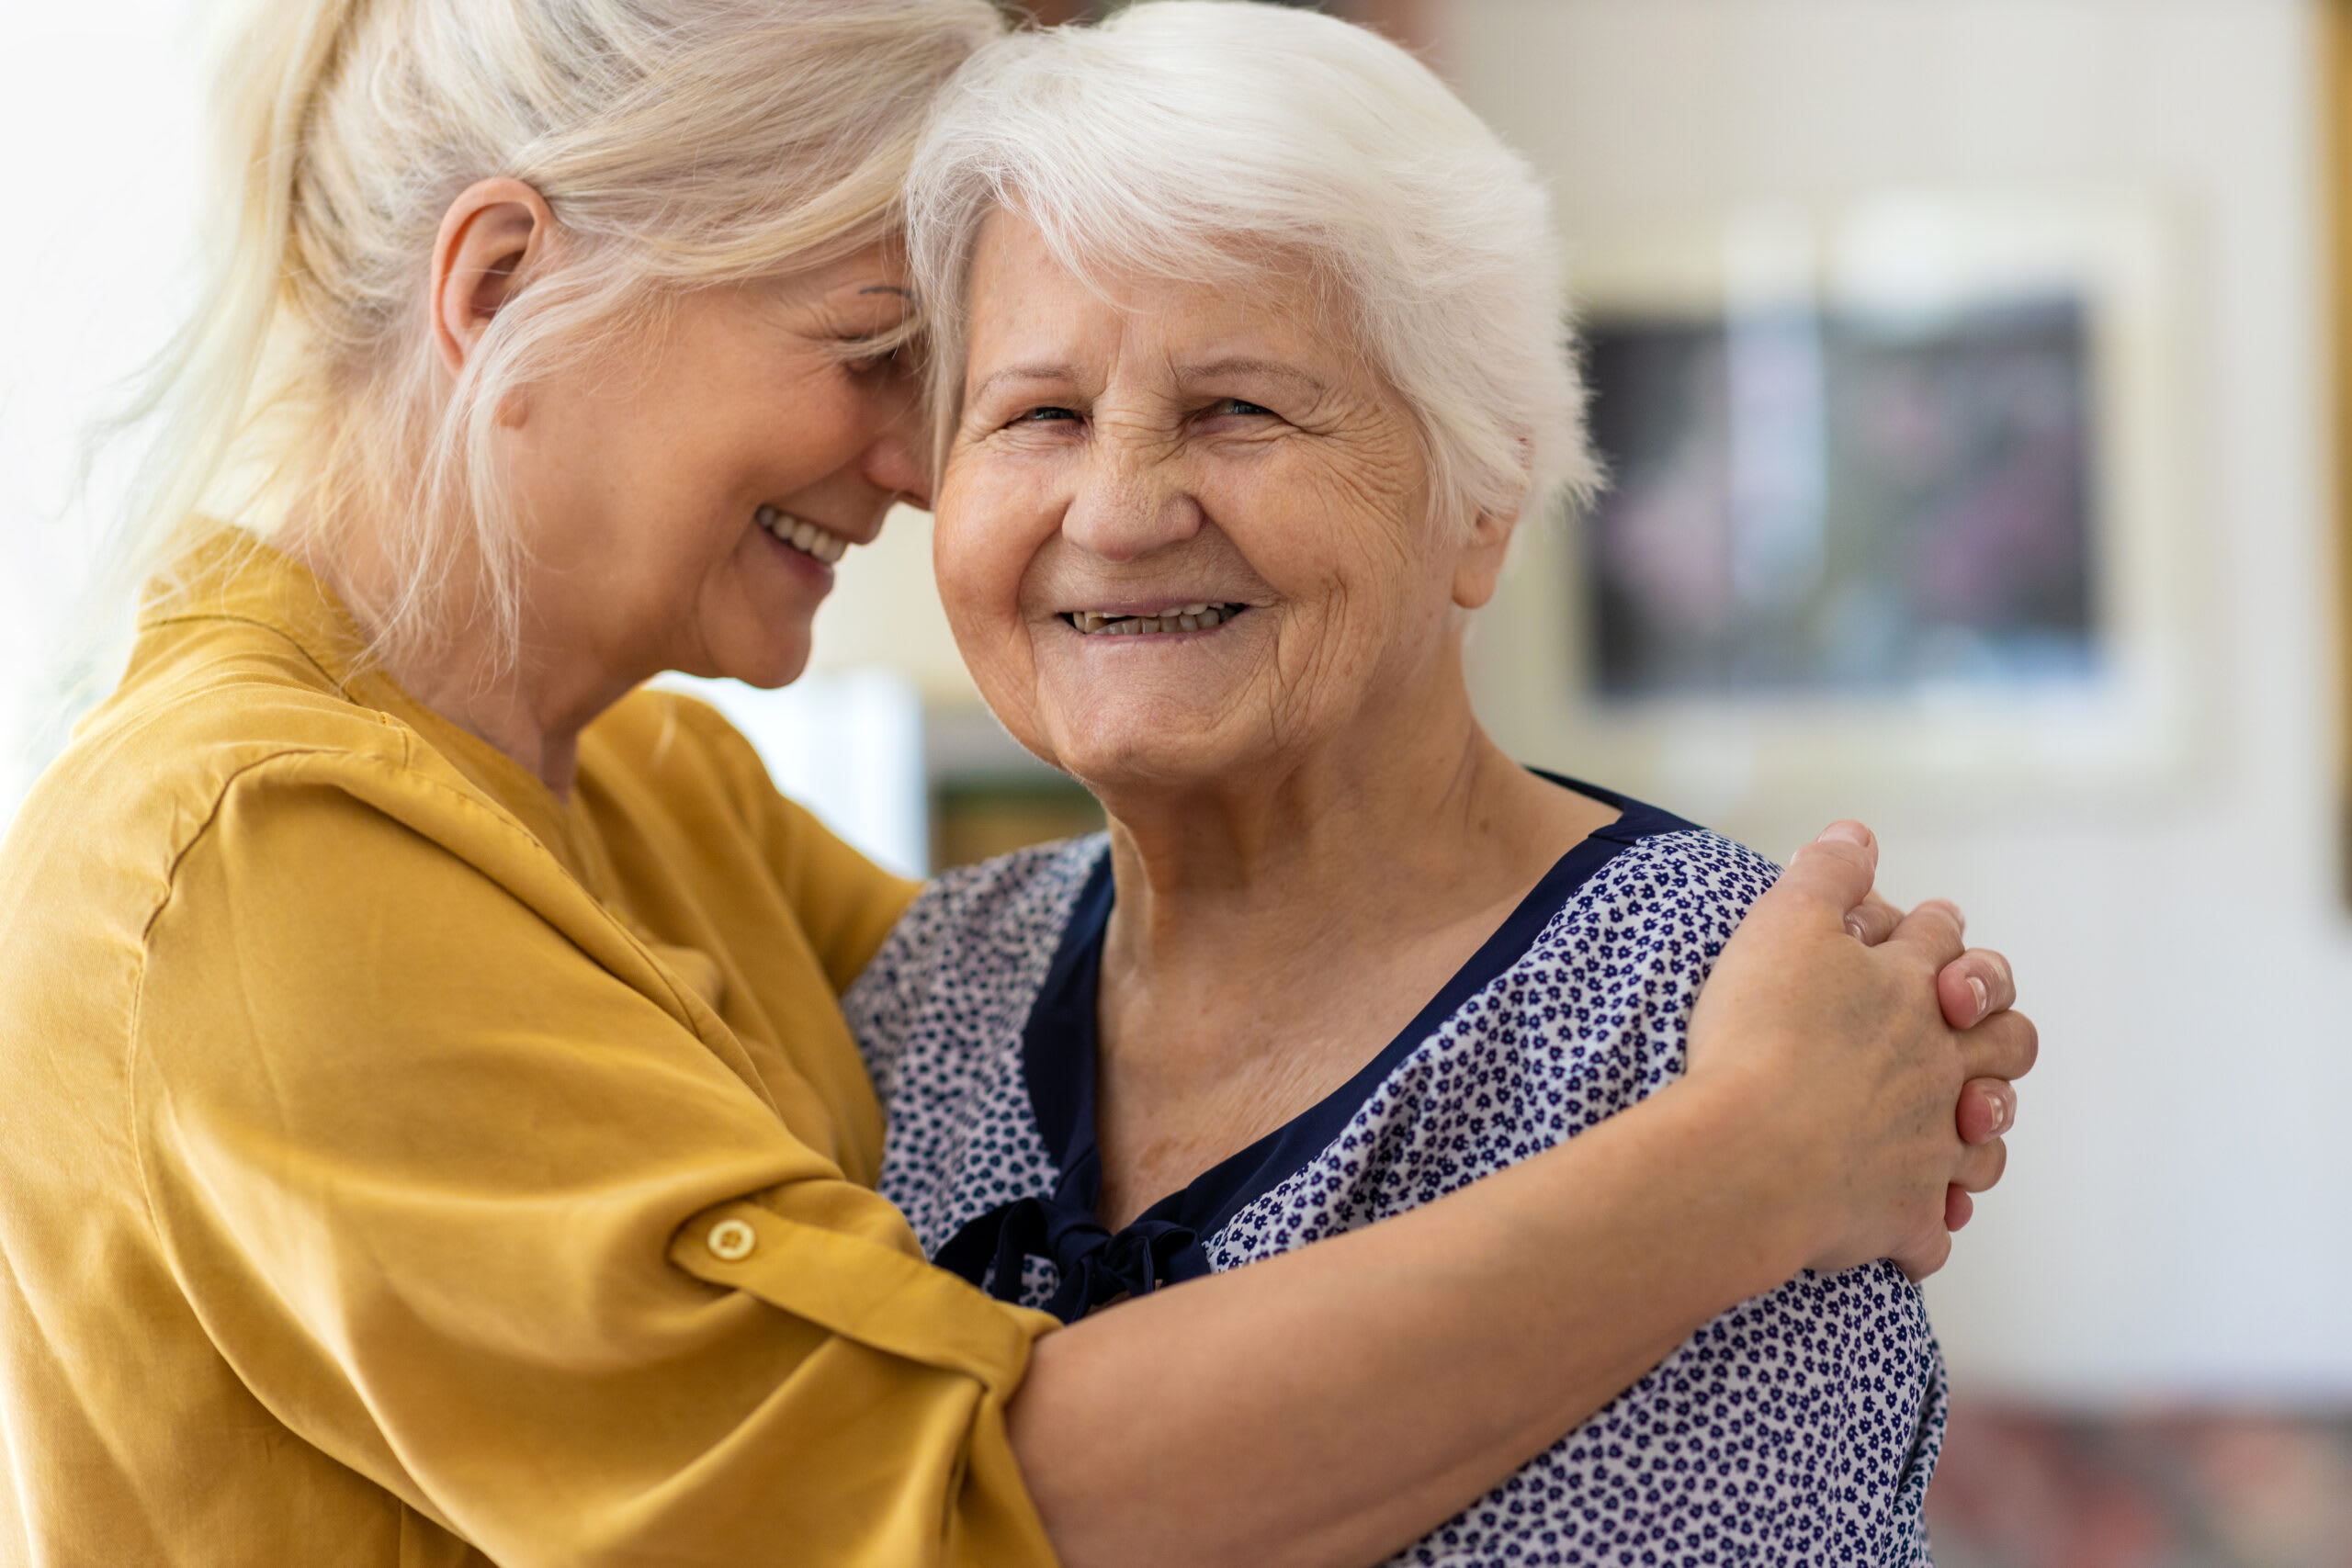 A woman hugs an elderly woman while smiling.